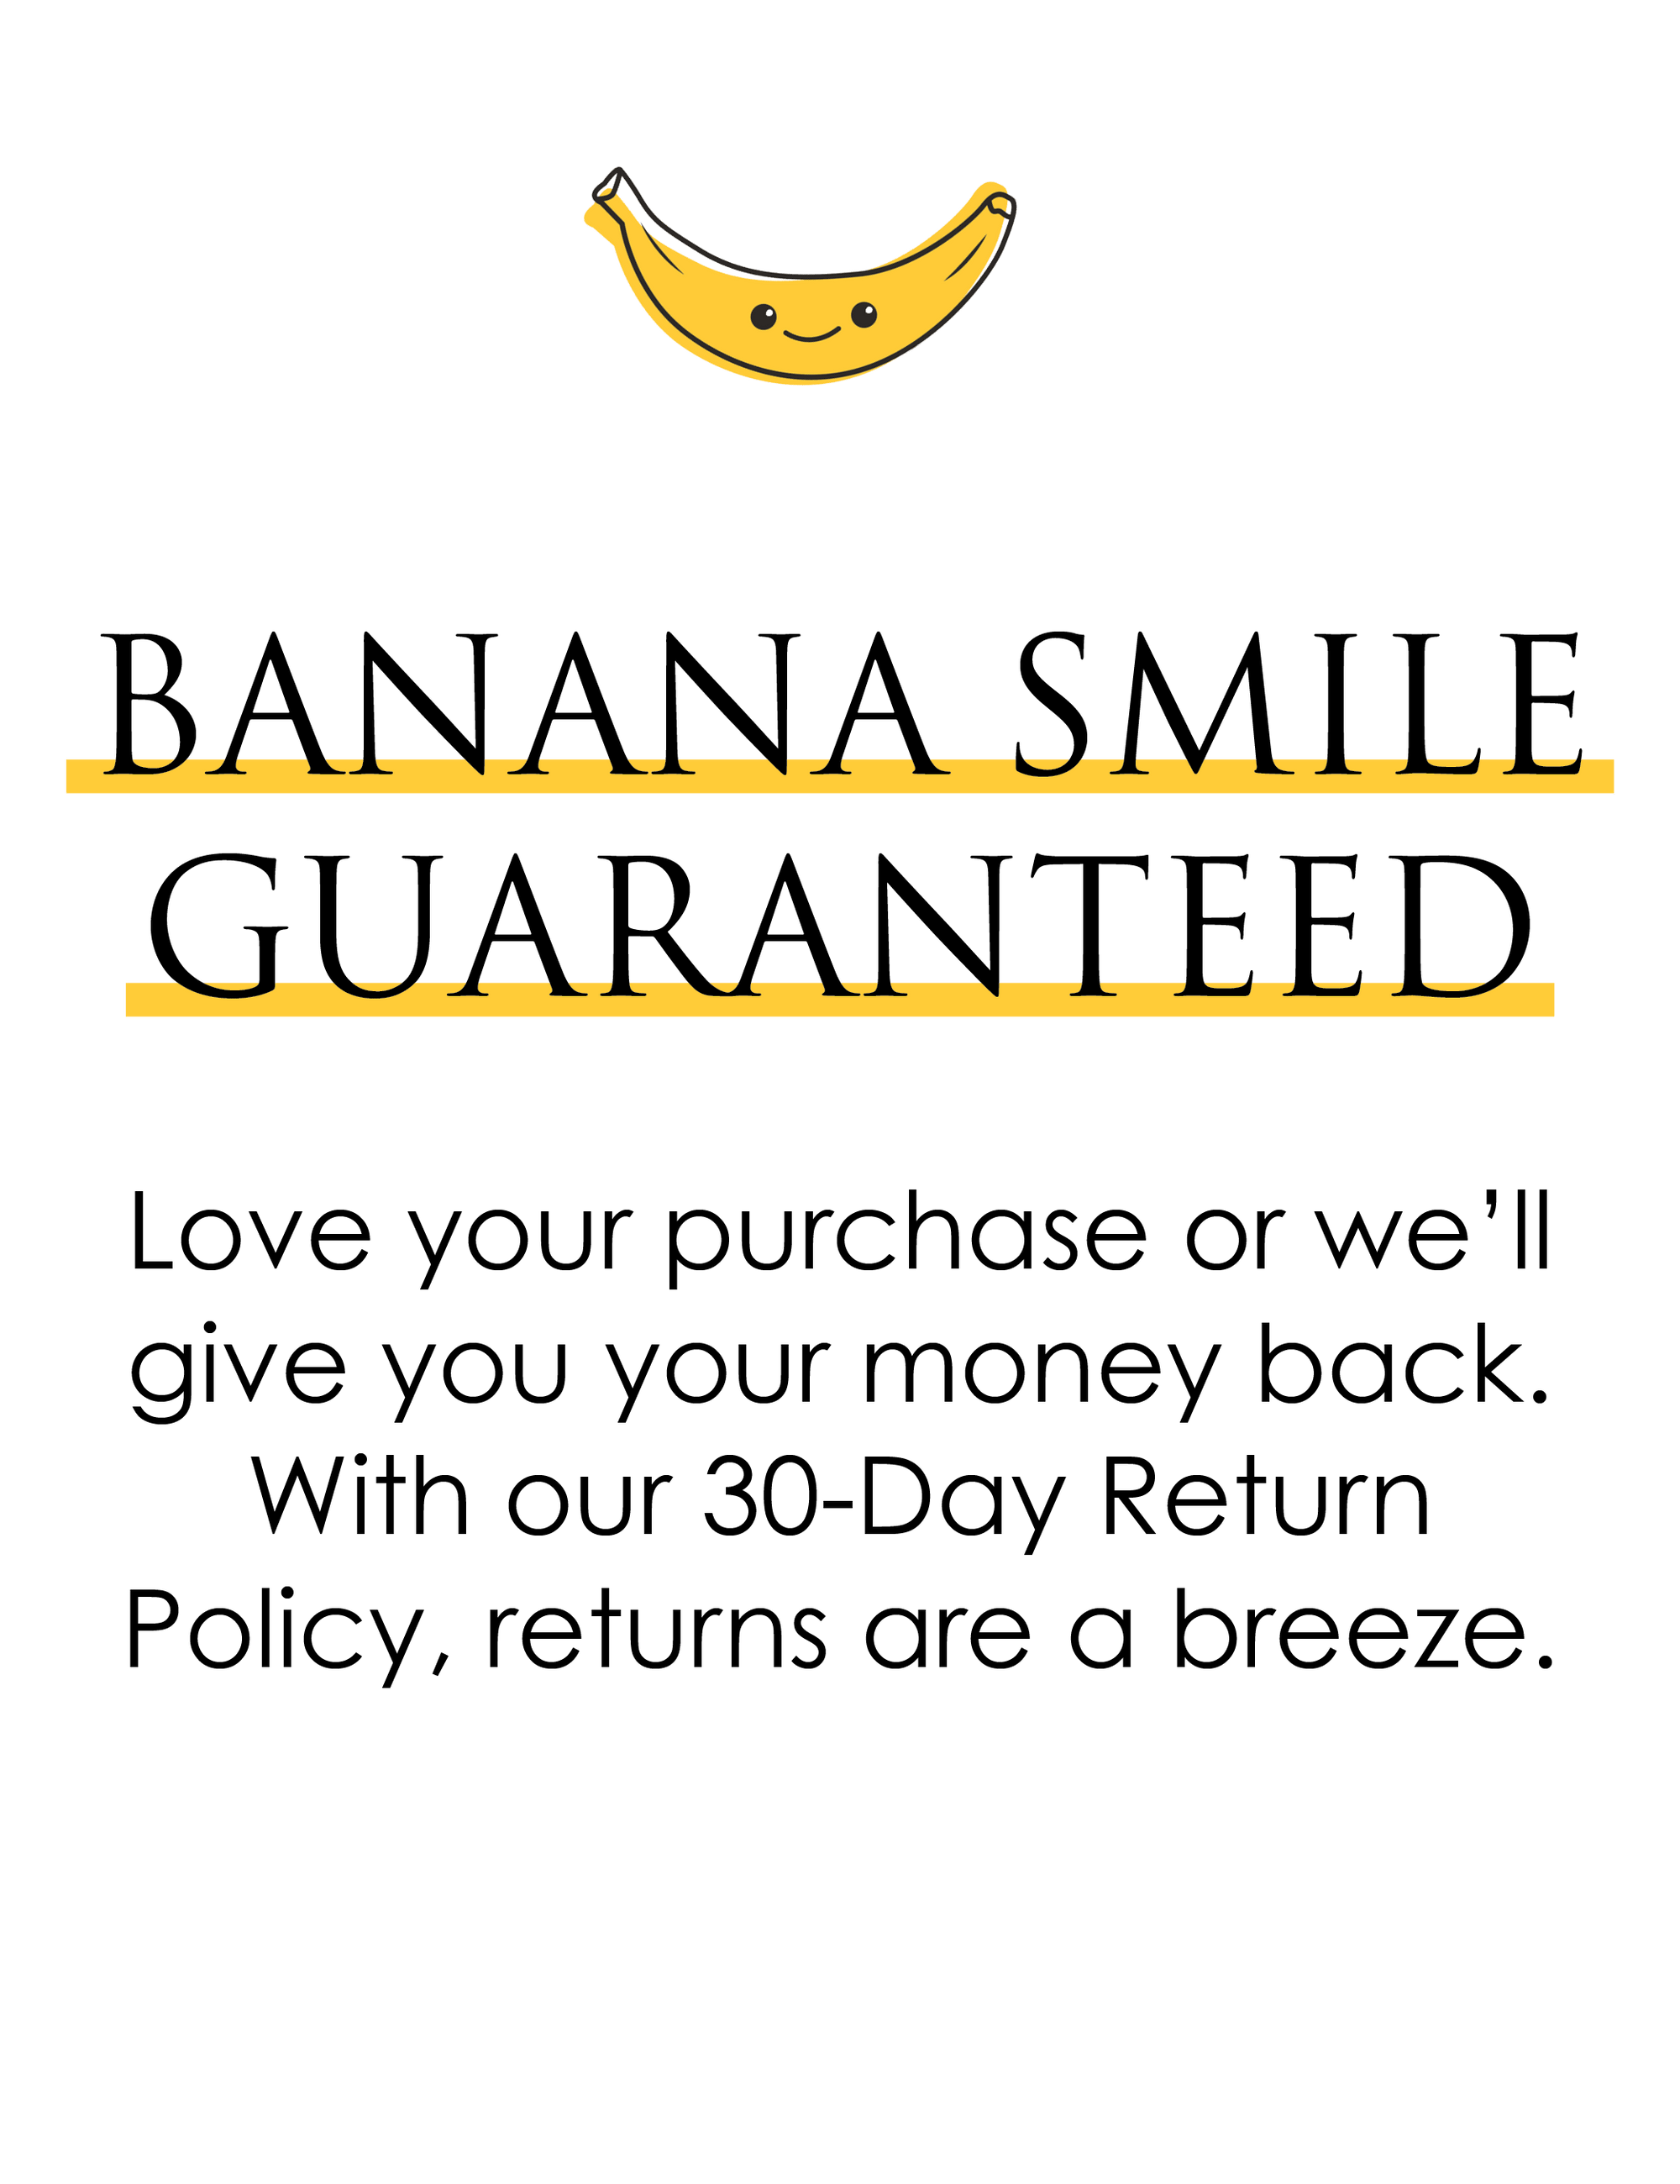 If you don't love your products, we will give you a refund